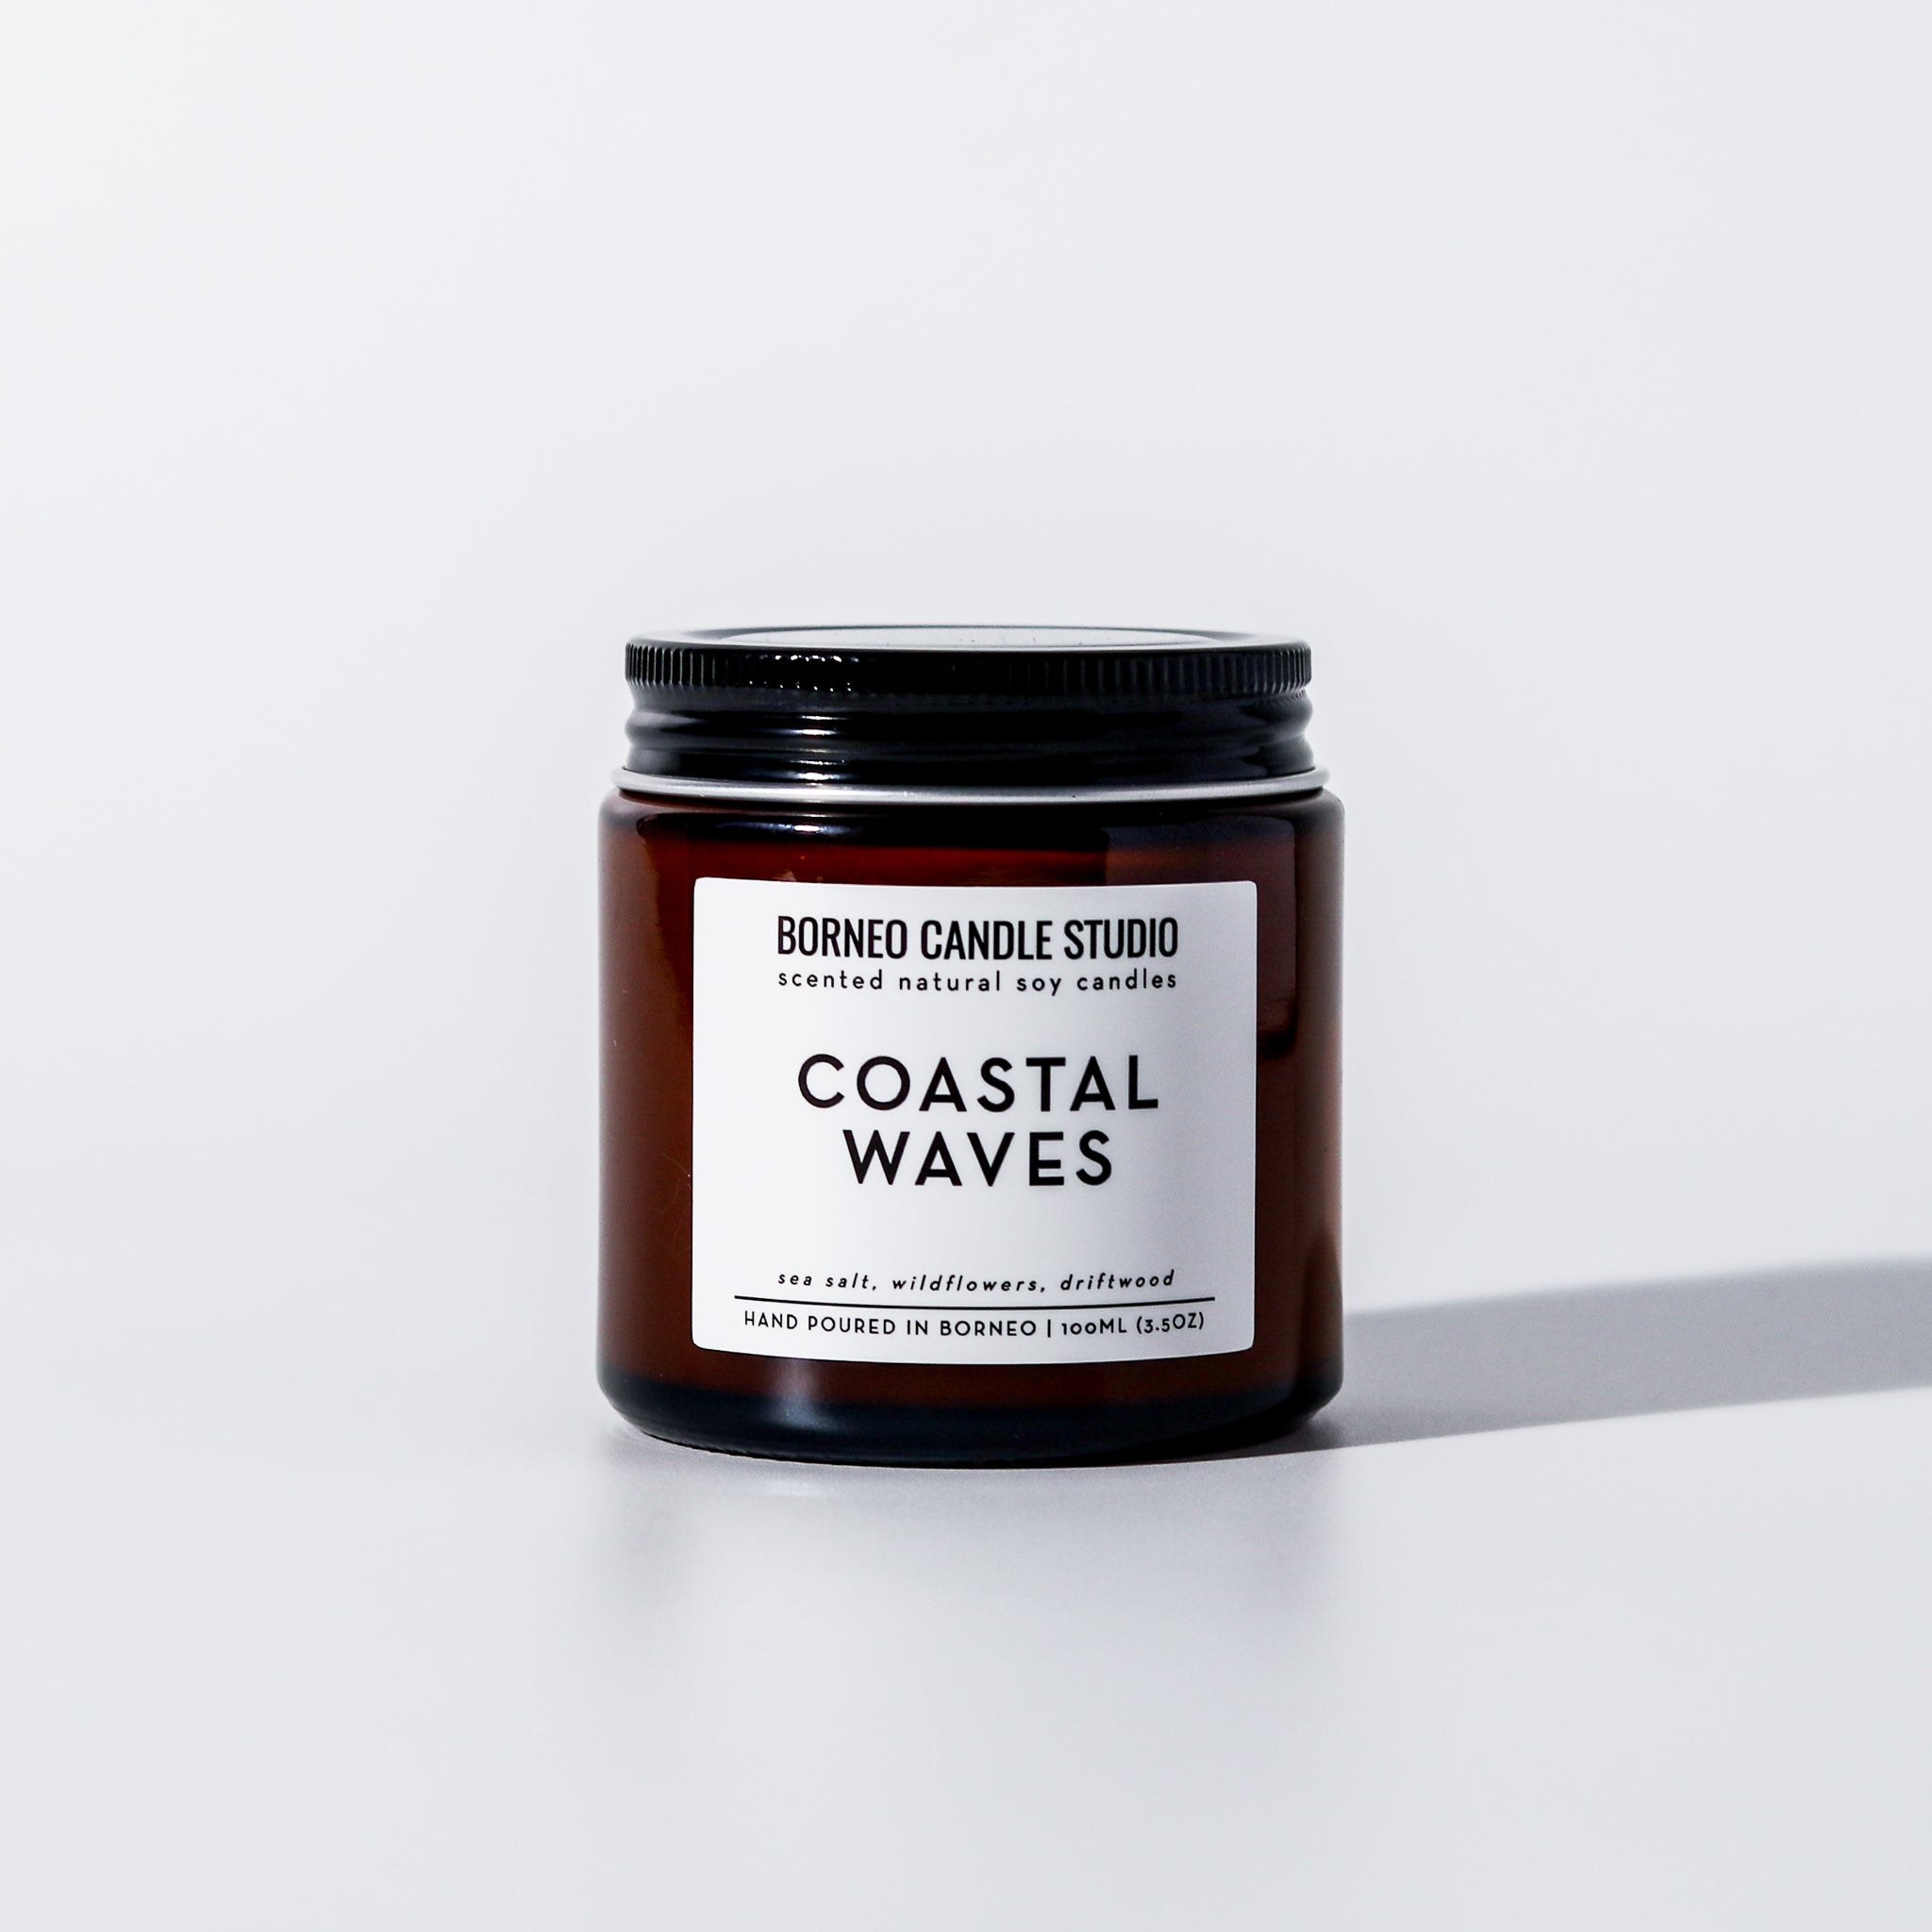 Coastal Waves Soy Candle - sea salt, wildflowers, driftwood scented candle in 3.5 oz amber glass jar with lid